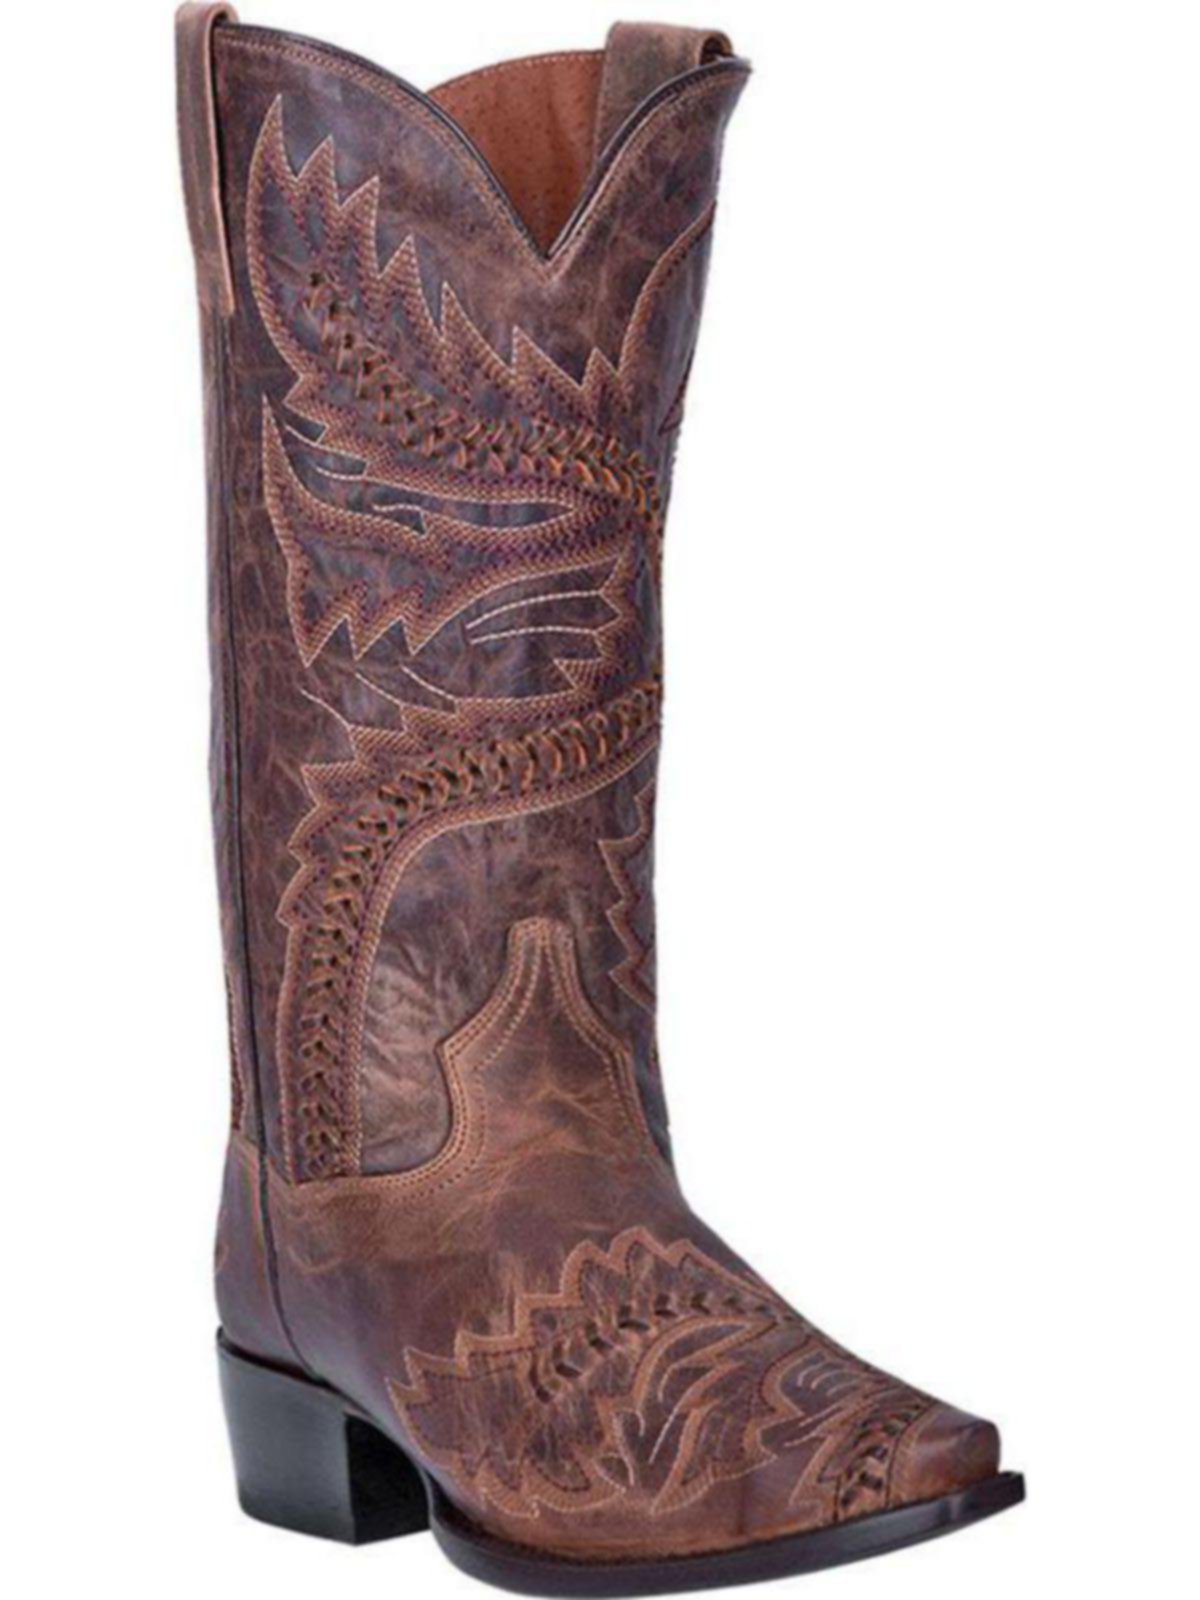 Shop Dan Post Mens Tuff Leather Boot Sand Cowboy Boot DP2575 | Save Now ...